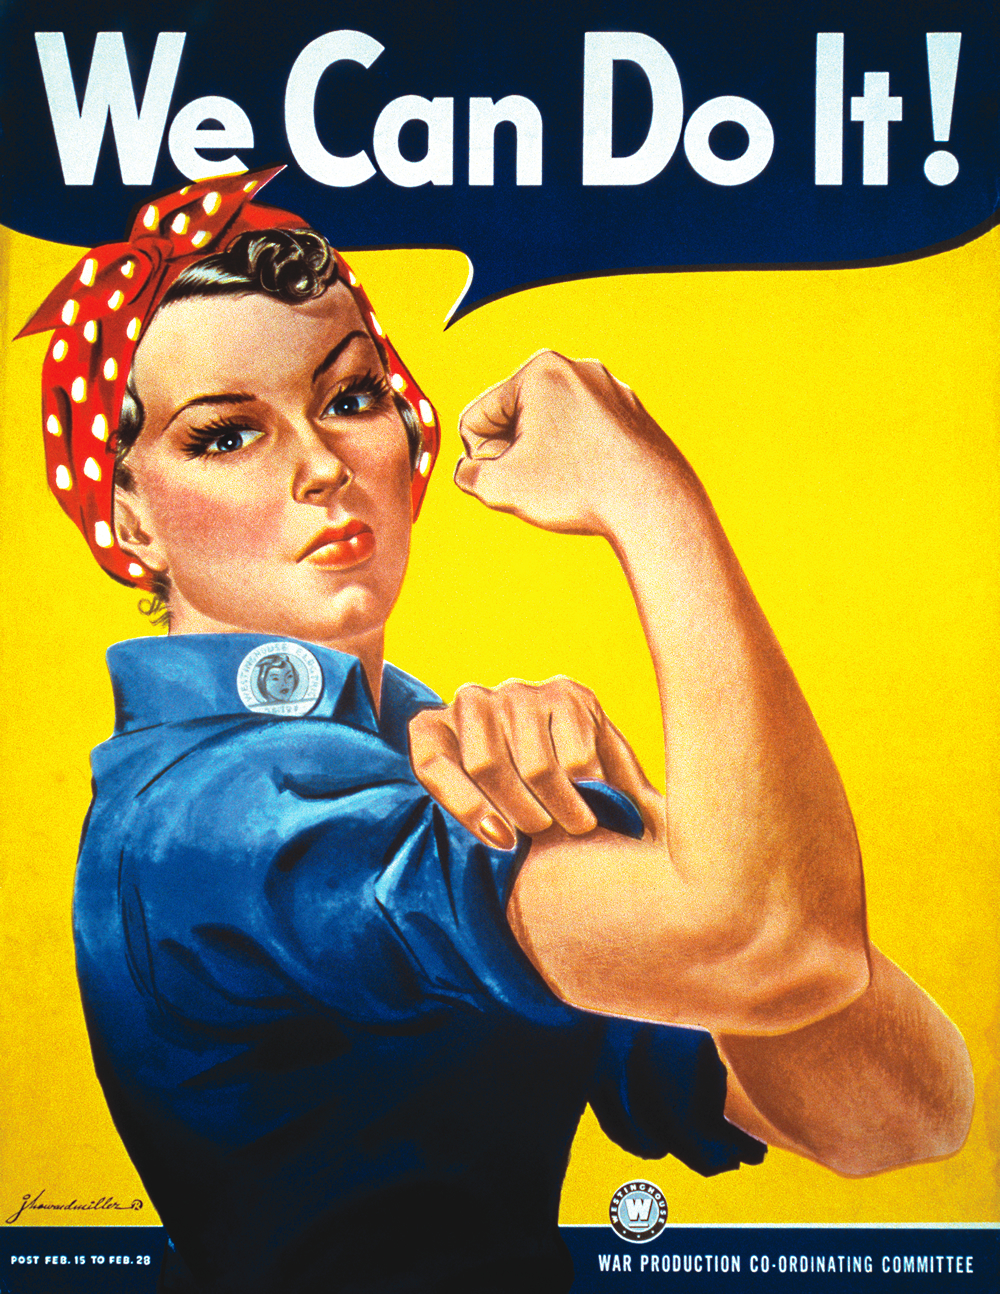 Rosie the Riveter is wearing a red and white polka dot headband and blue shirt and is flexing her arm muscle. Details in text.